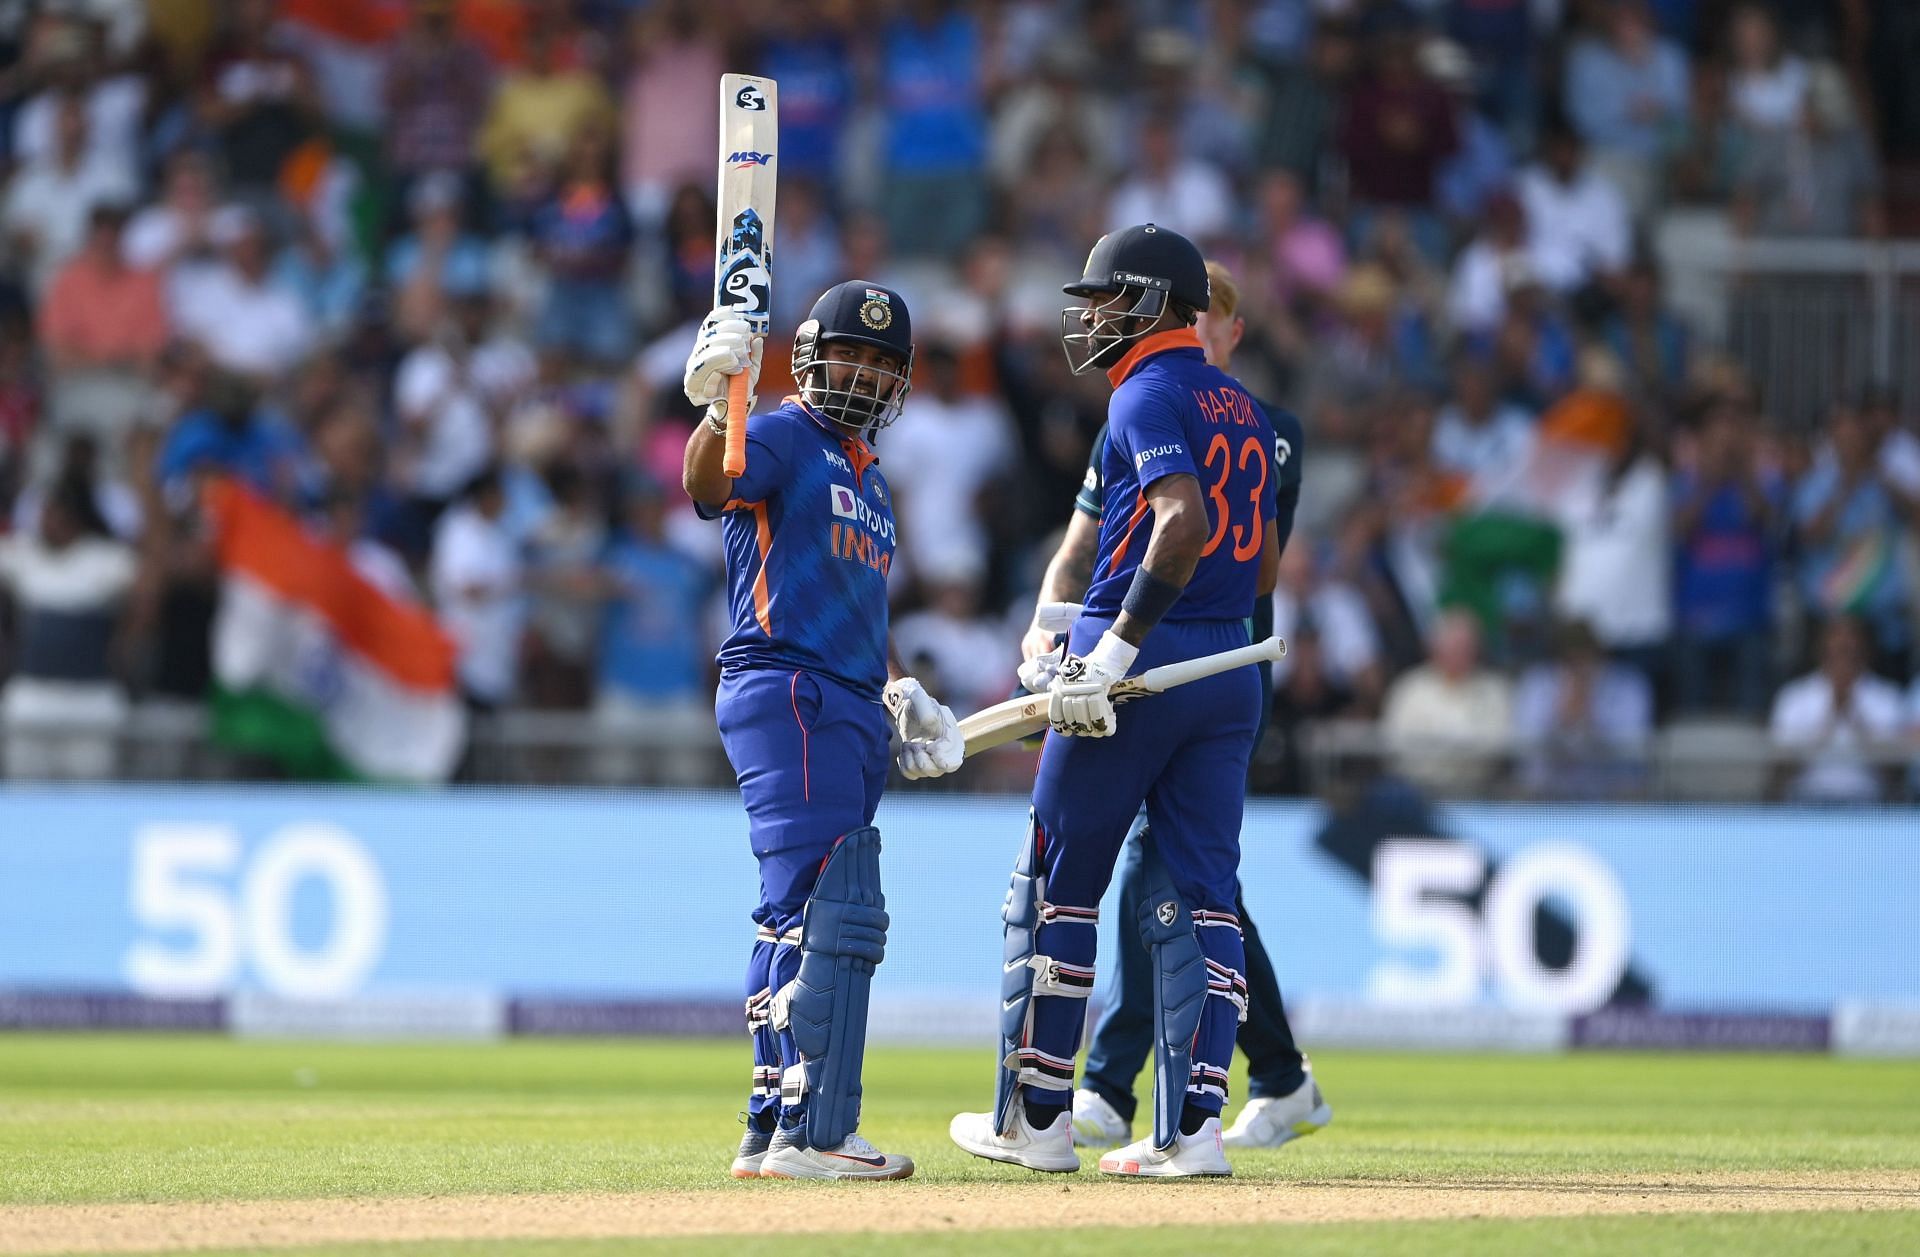 Rishabh Pant scored a match winning century against England in Manchester